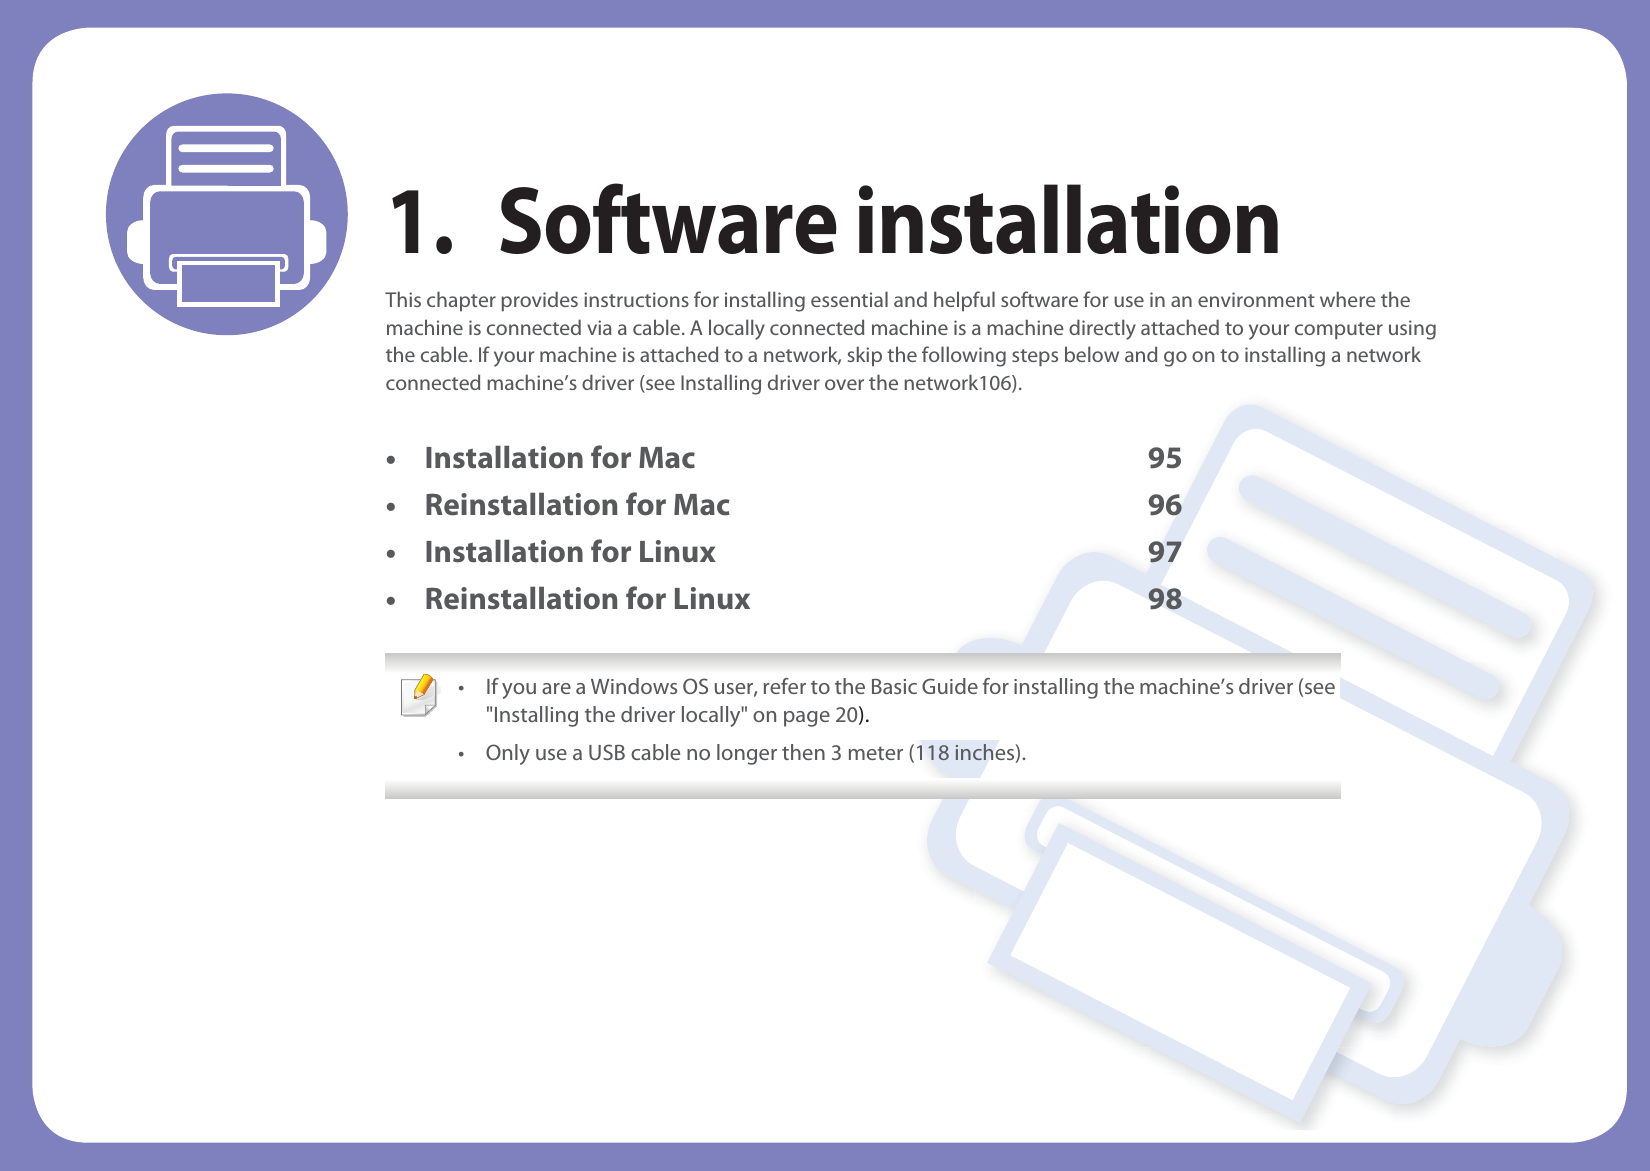 1. Software installationThis chapter provides instructions for installing essential and helpful software for use in an environment where the machine is connected via a cable. A locally connected machine is a machine directly attached to your computer using the cable. If your machine is attached to a network, skip the following steps below and go on to installing a network connected machine’s driver (see Installing driver over the network106).• Installation for Mac 95• Reinstallation for Mac 96• Installation for Linux 97• Reinstallation for Linux 98 • If you are a Windows OS user, refer to the Basic Guide for installing the machine’s driver (see &quot;Installing the driver locally&quot; on page 20).• Only use a USB cable no longer then 3 meter (118 inches). 